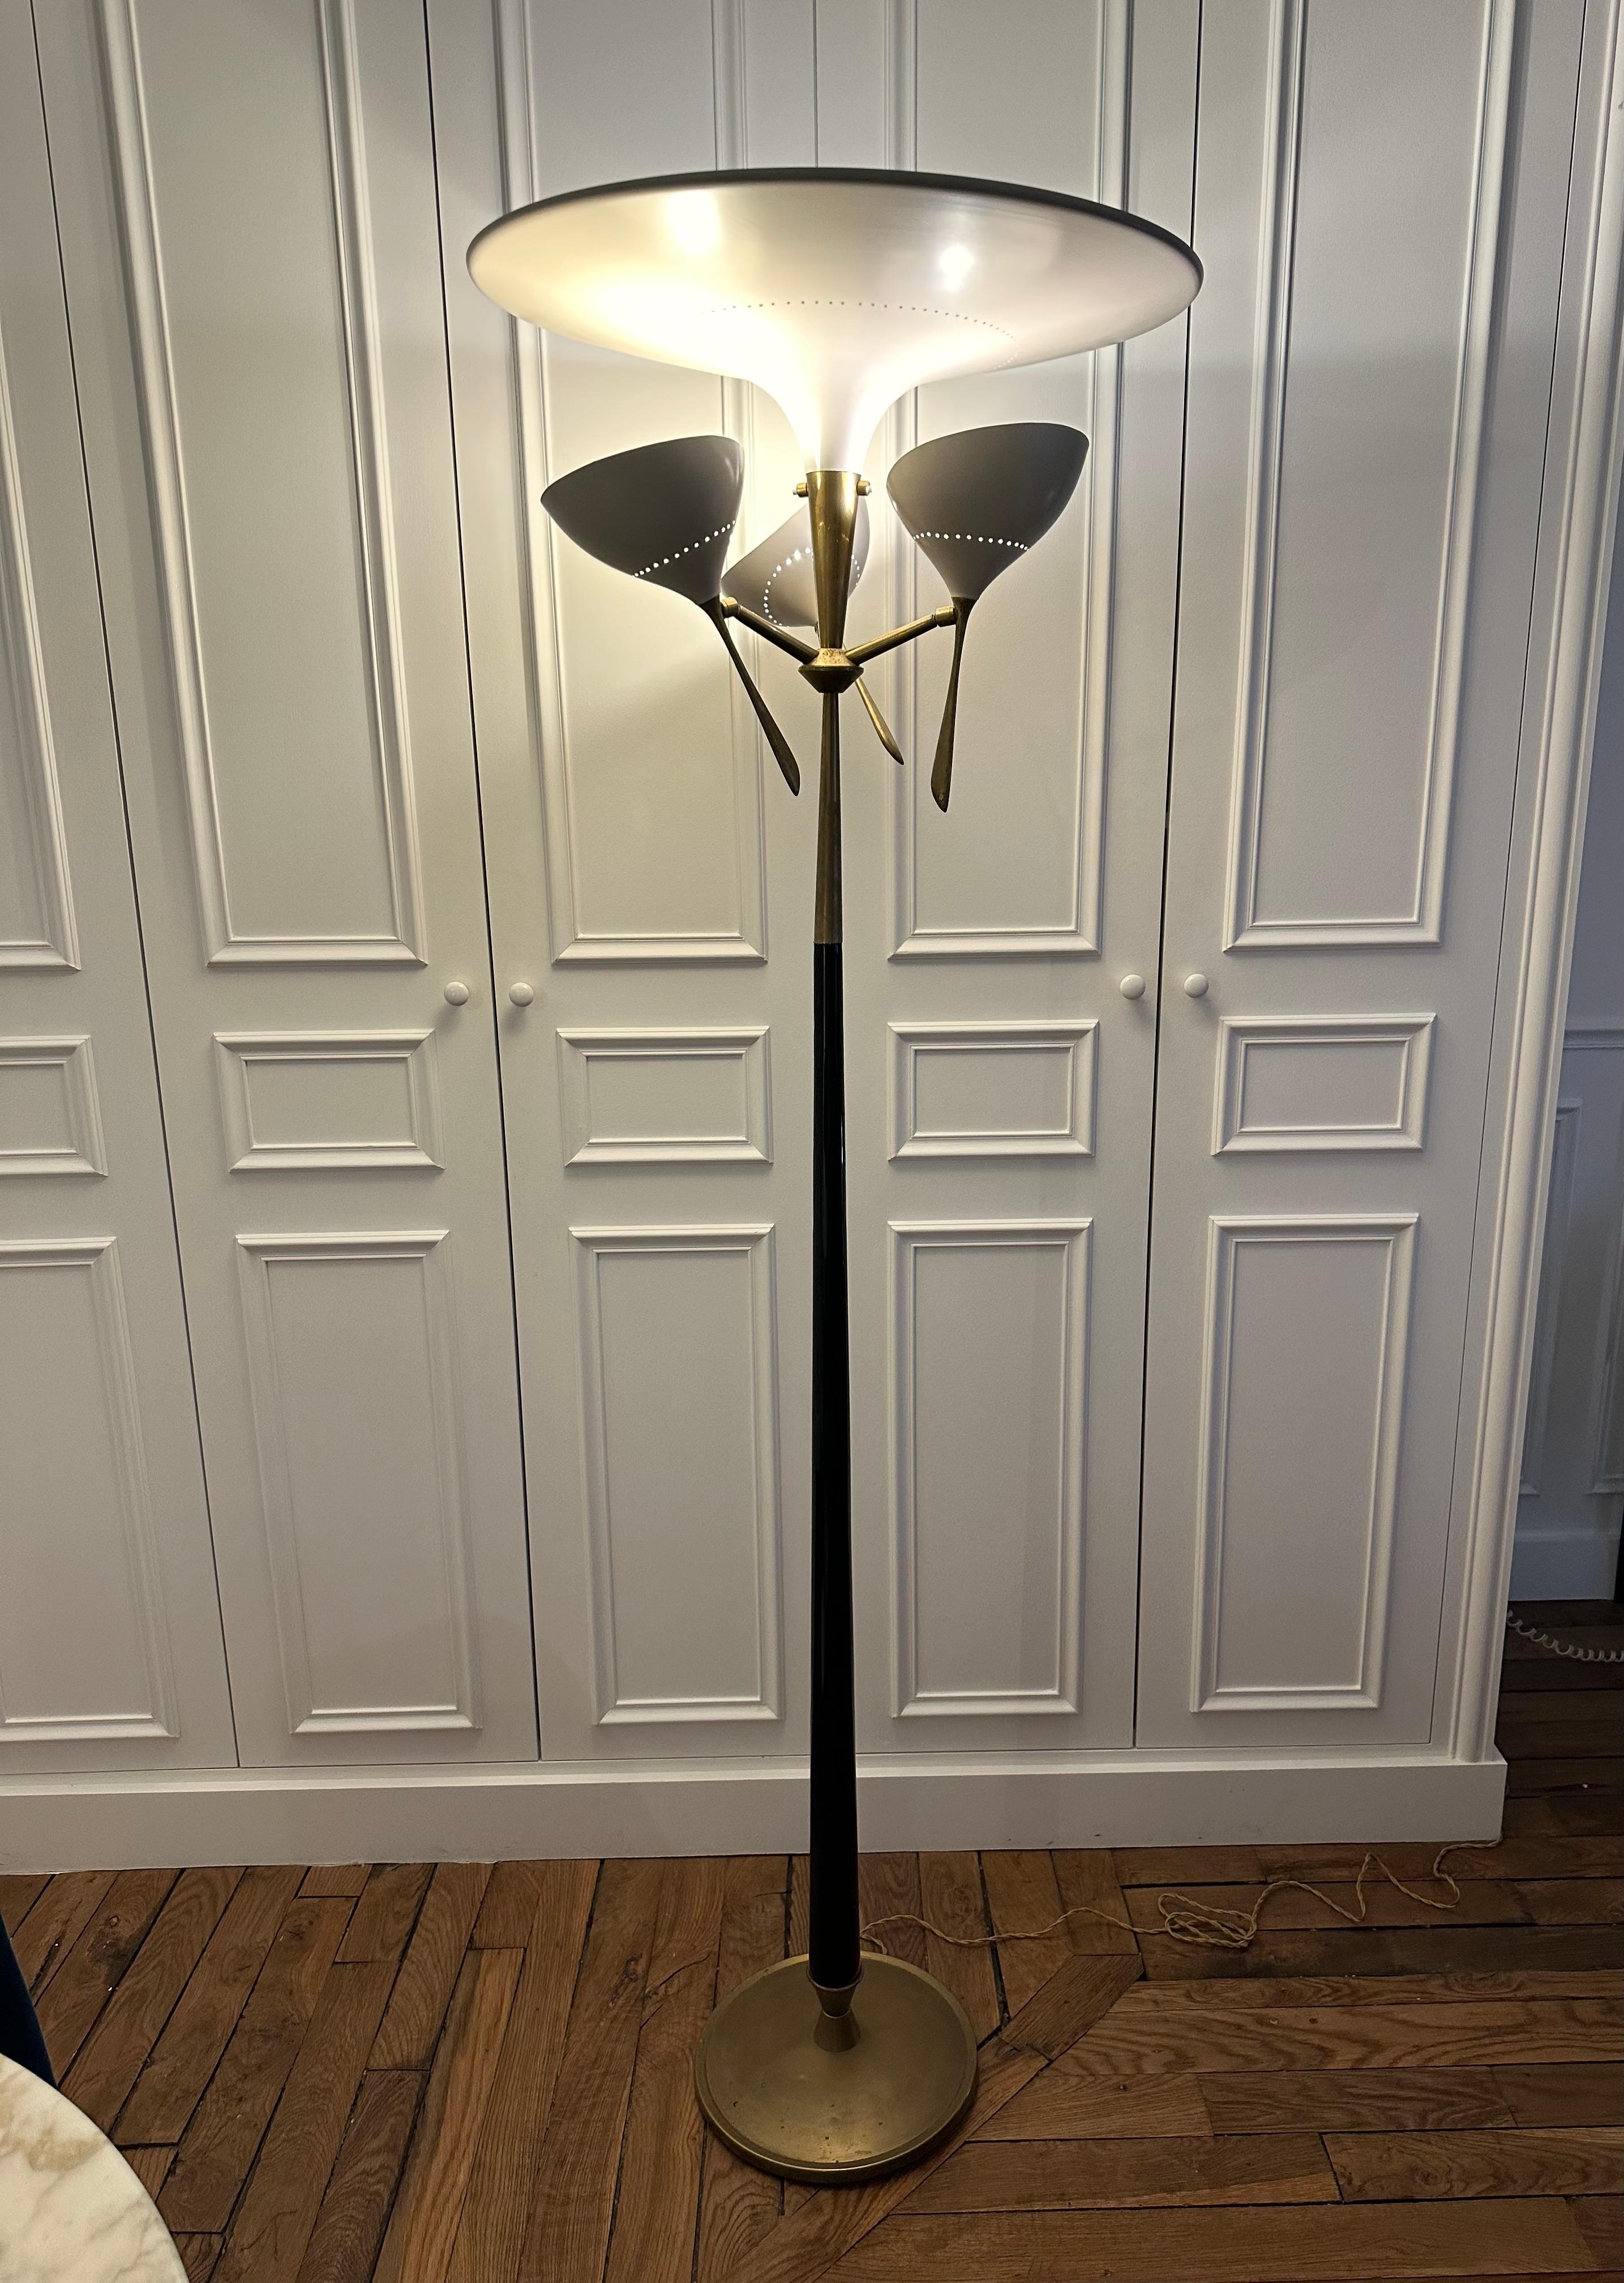 Lacquered Italian Mid-Century Modern Metal and Brass Floor Lamp by Lumen, 1950s For Sale